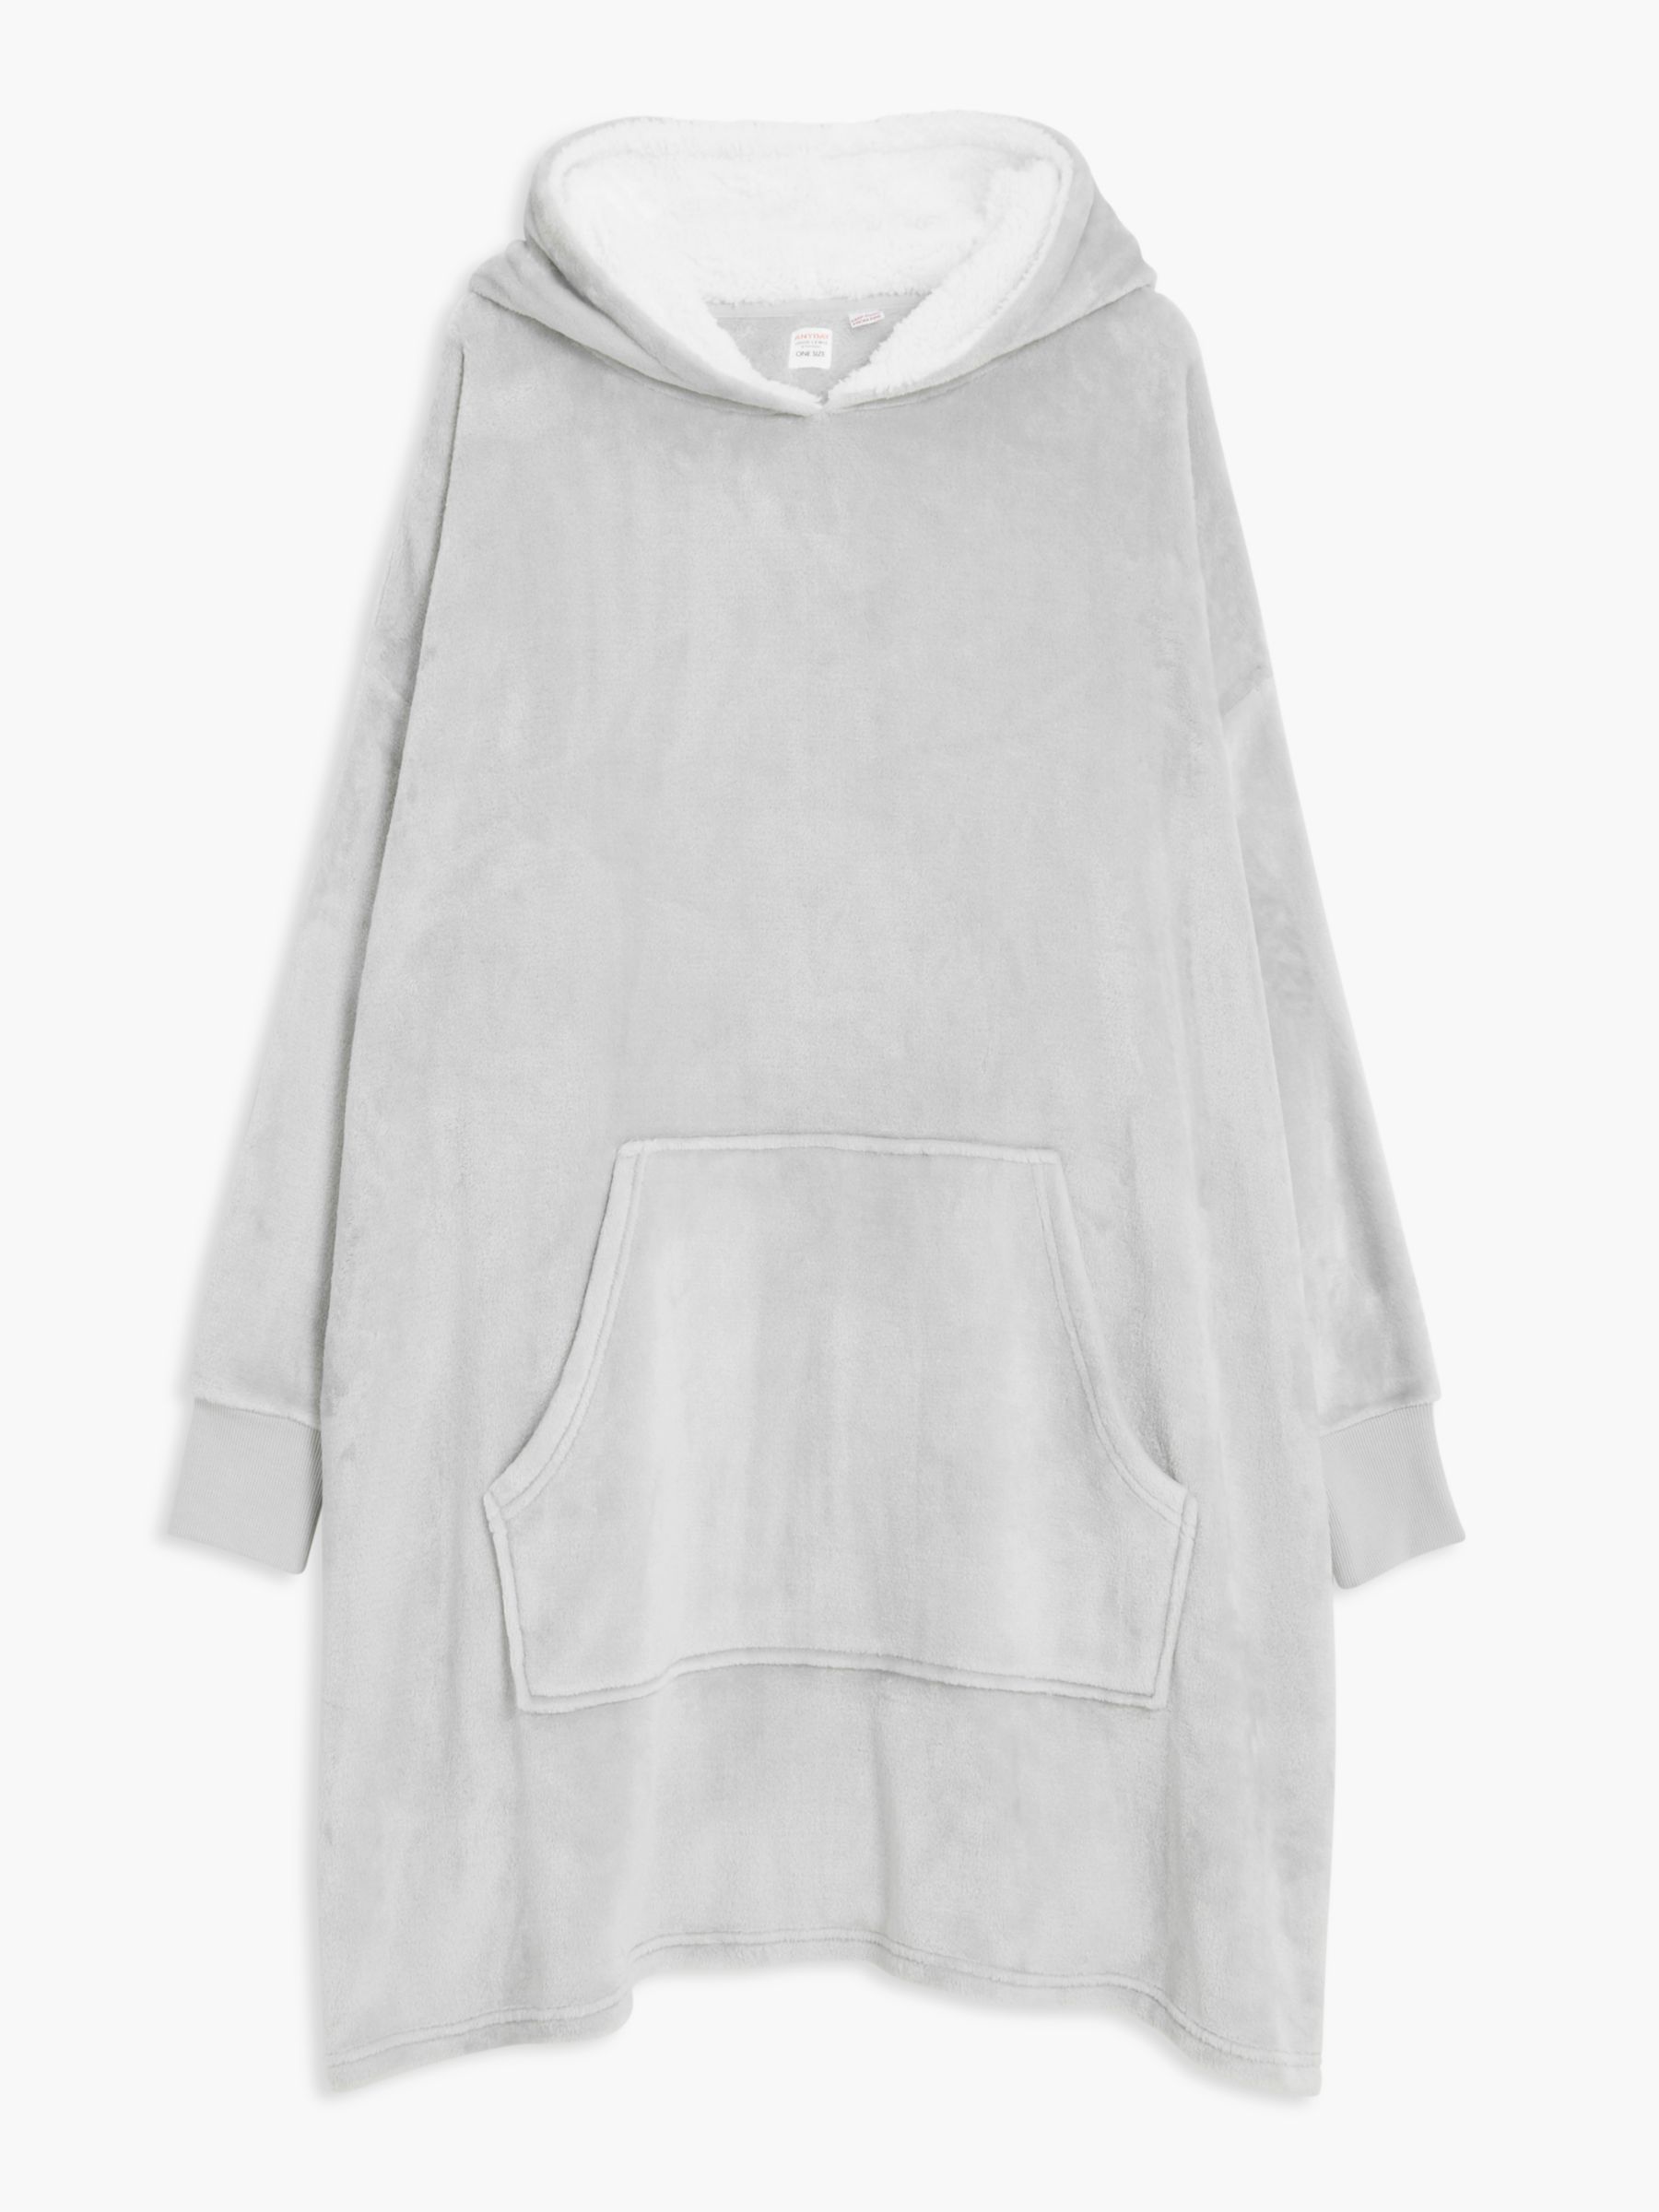 Anyday John Lewis And Partners Extreme Oversized Hoodie Grey At John Lewis And Partners